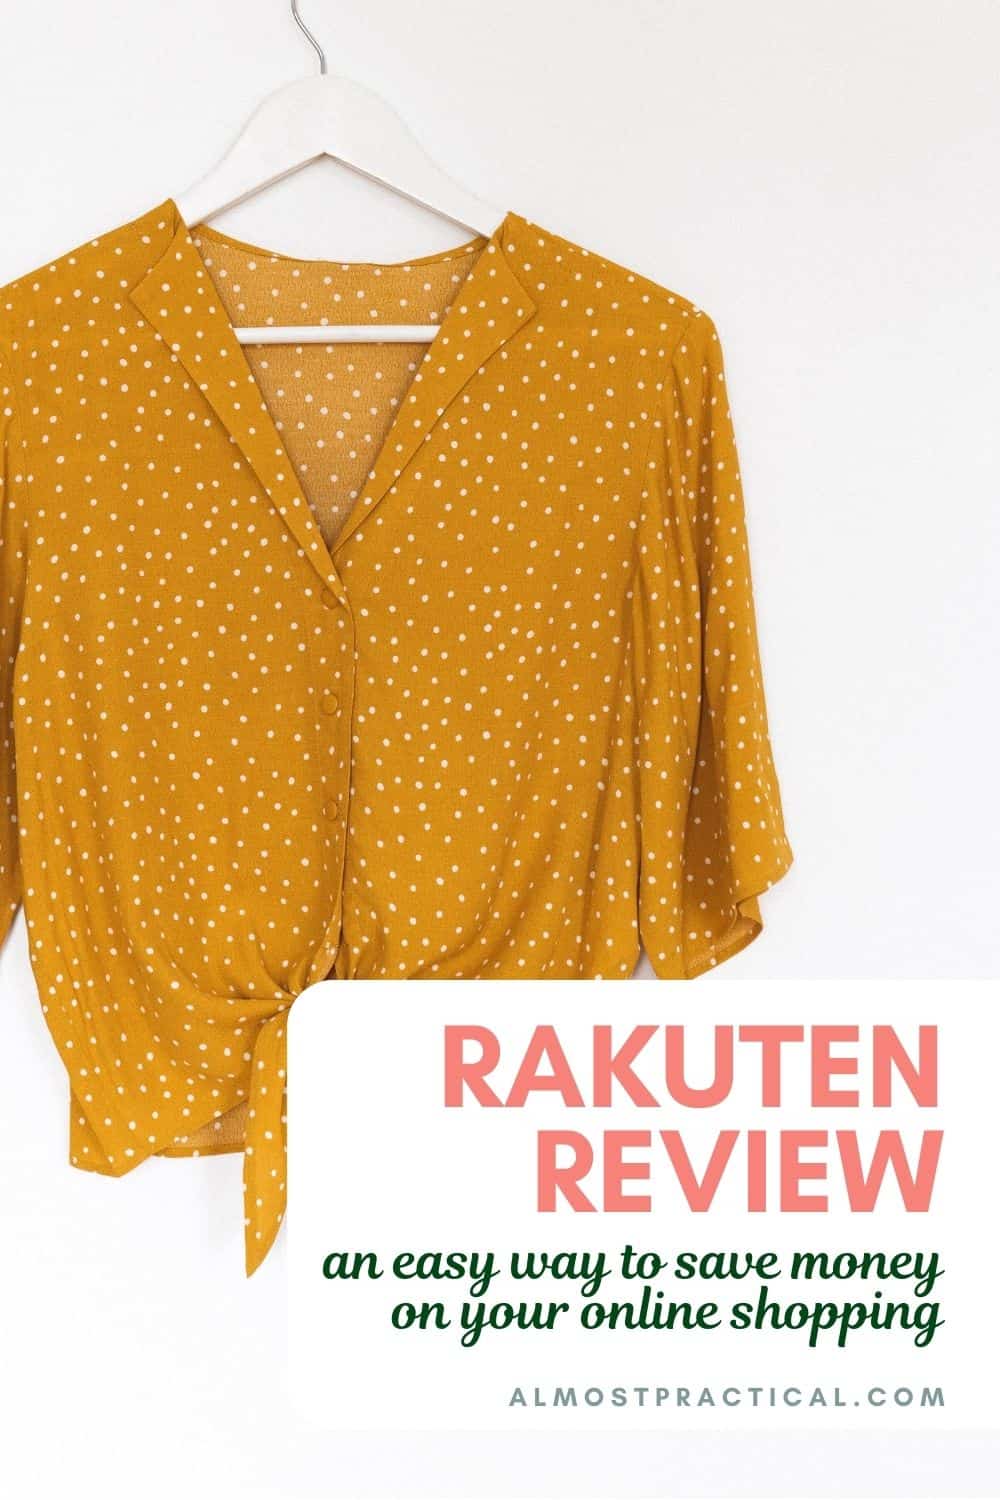 mustard color blouse on a hanger